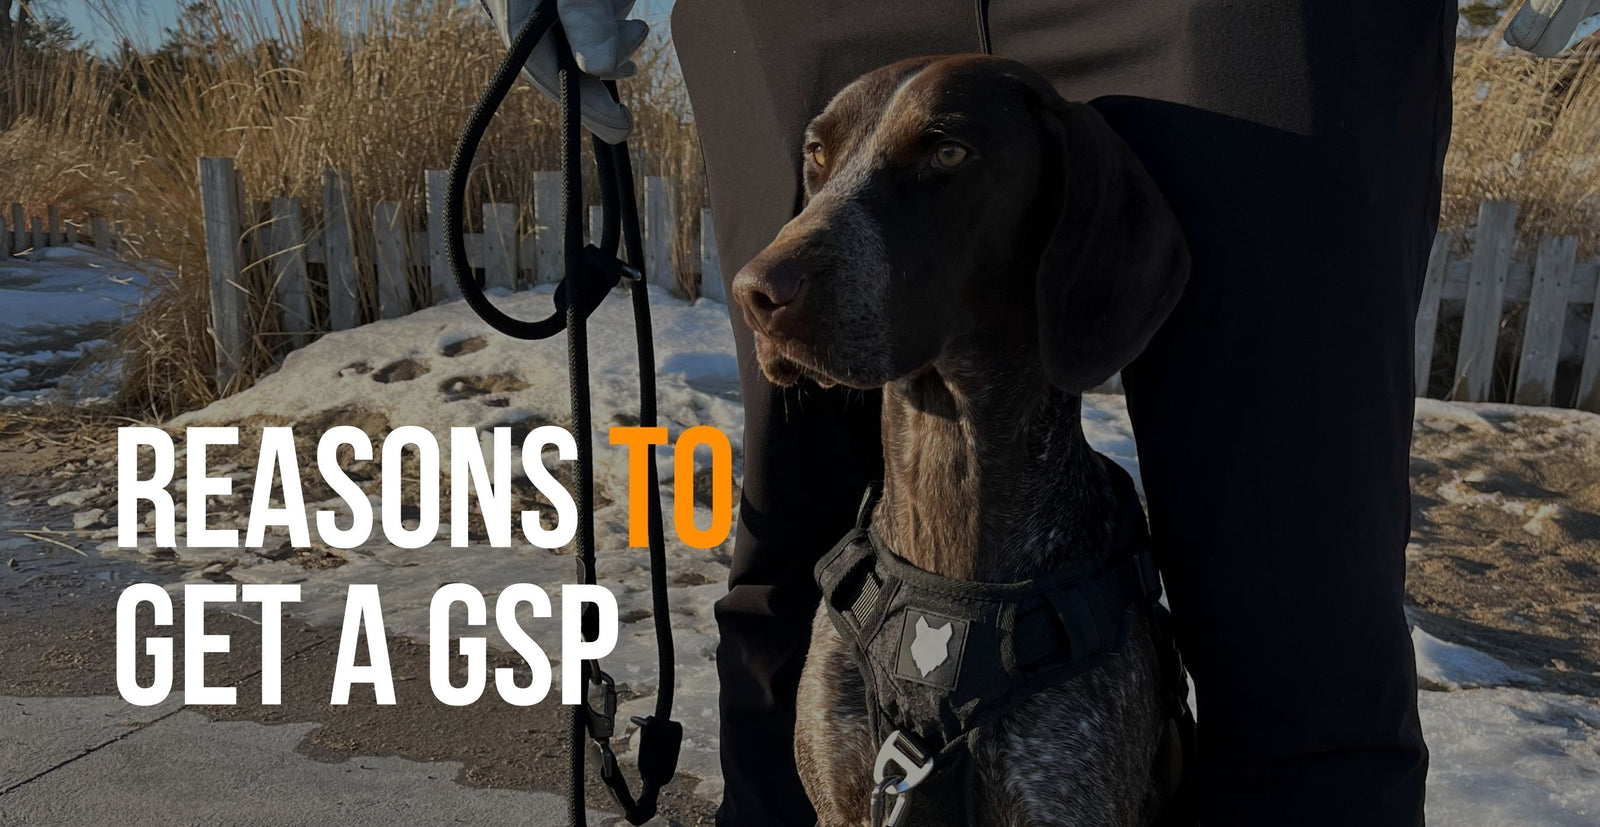 fenrir canine leaders 5 reasons you should get a gsp